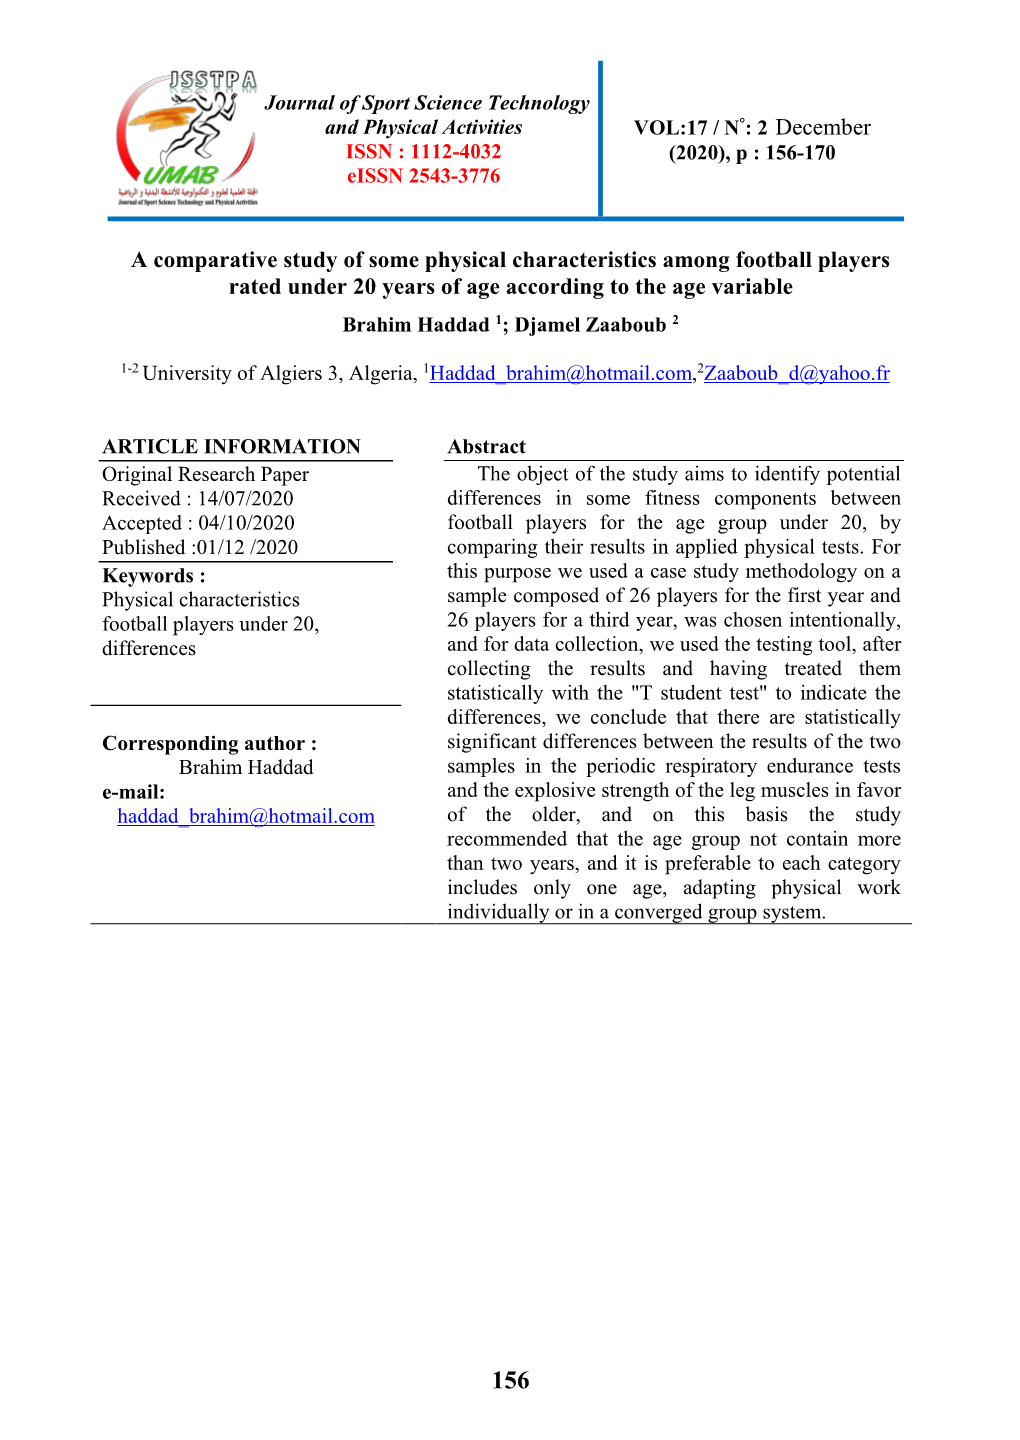 A Comparative Study of Some Physical Characteristics Among Football